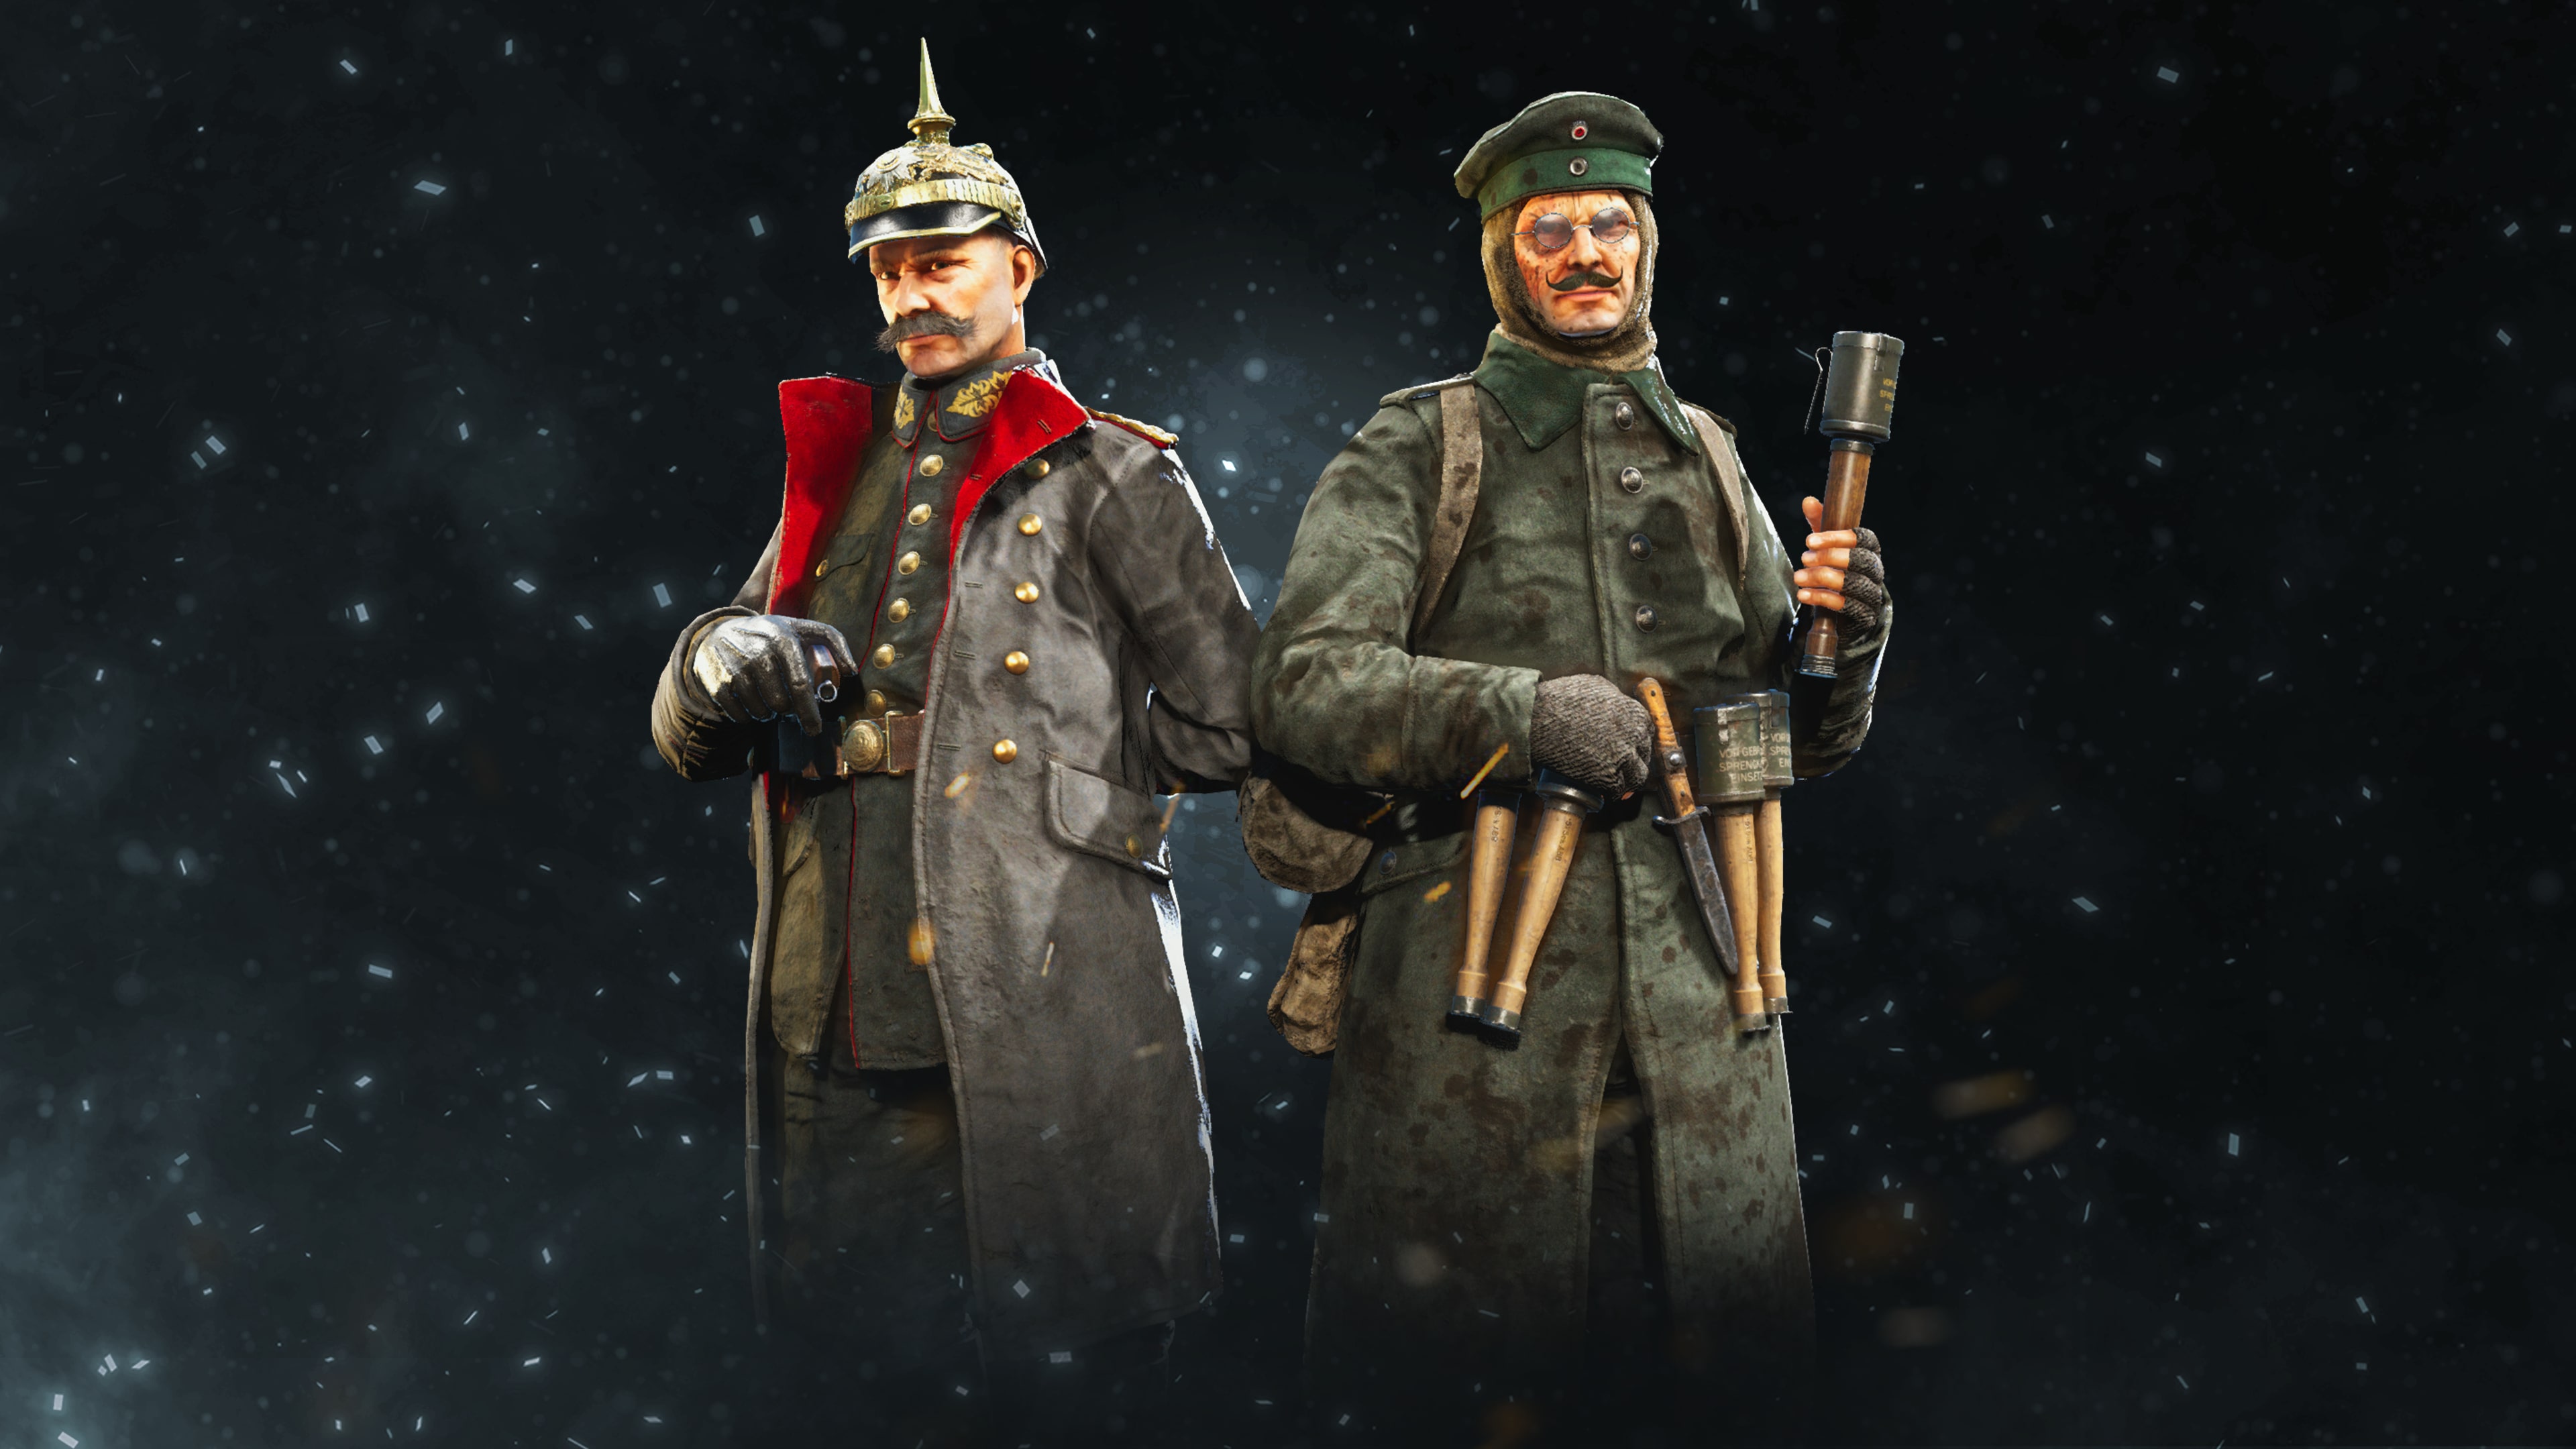 Isonzo - Expedition Units Pack